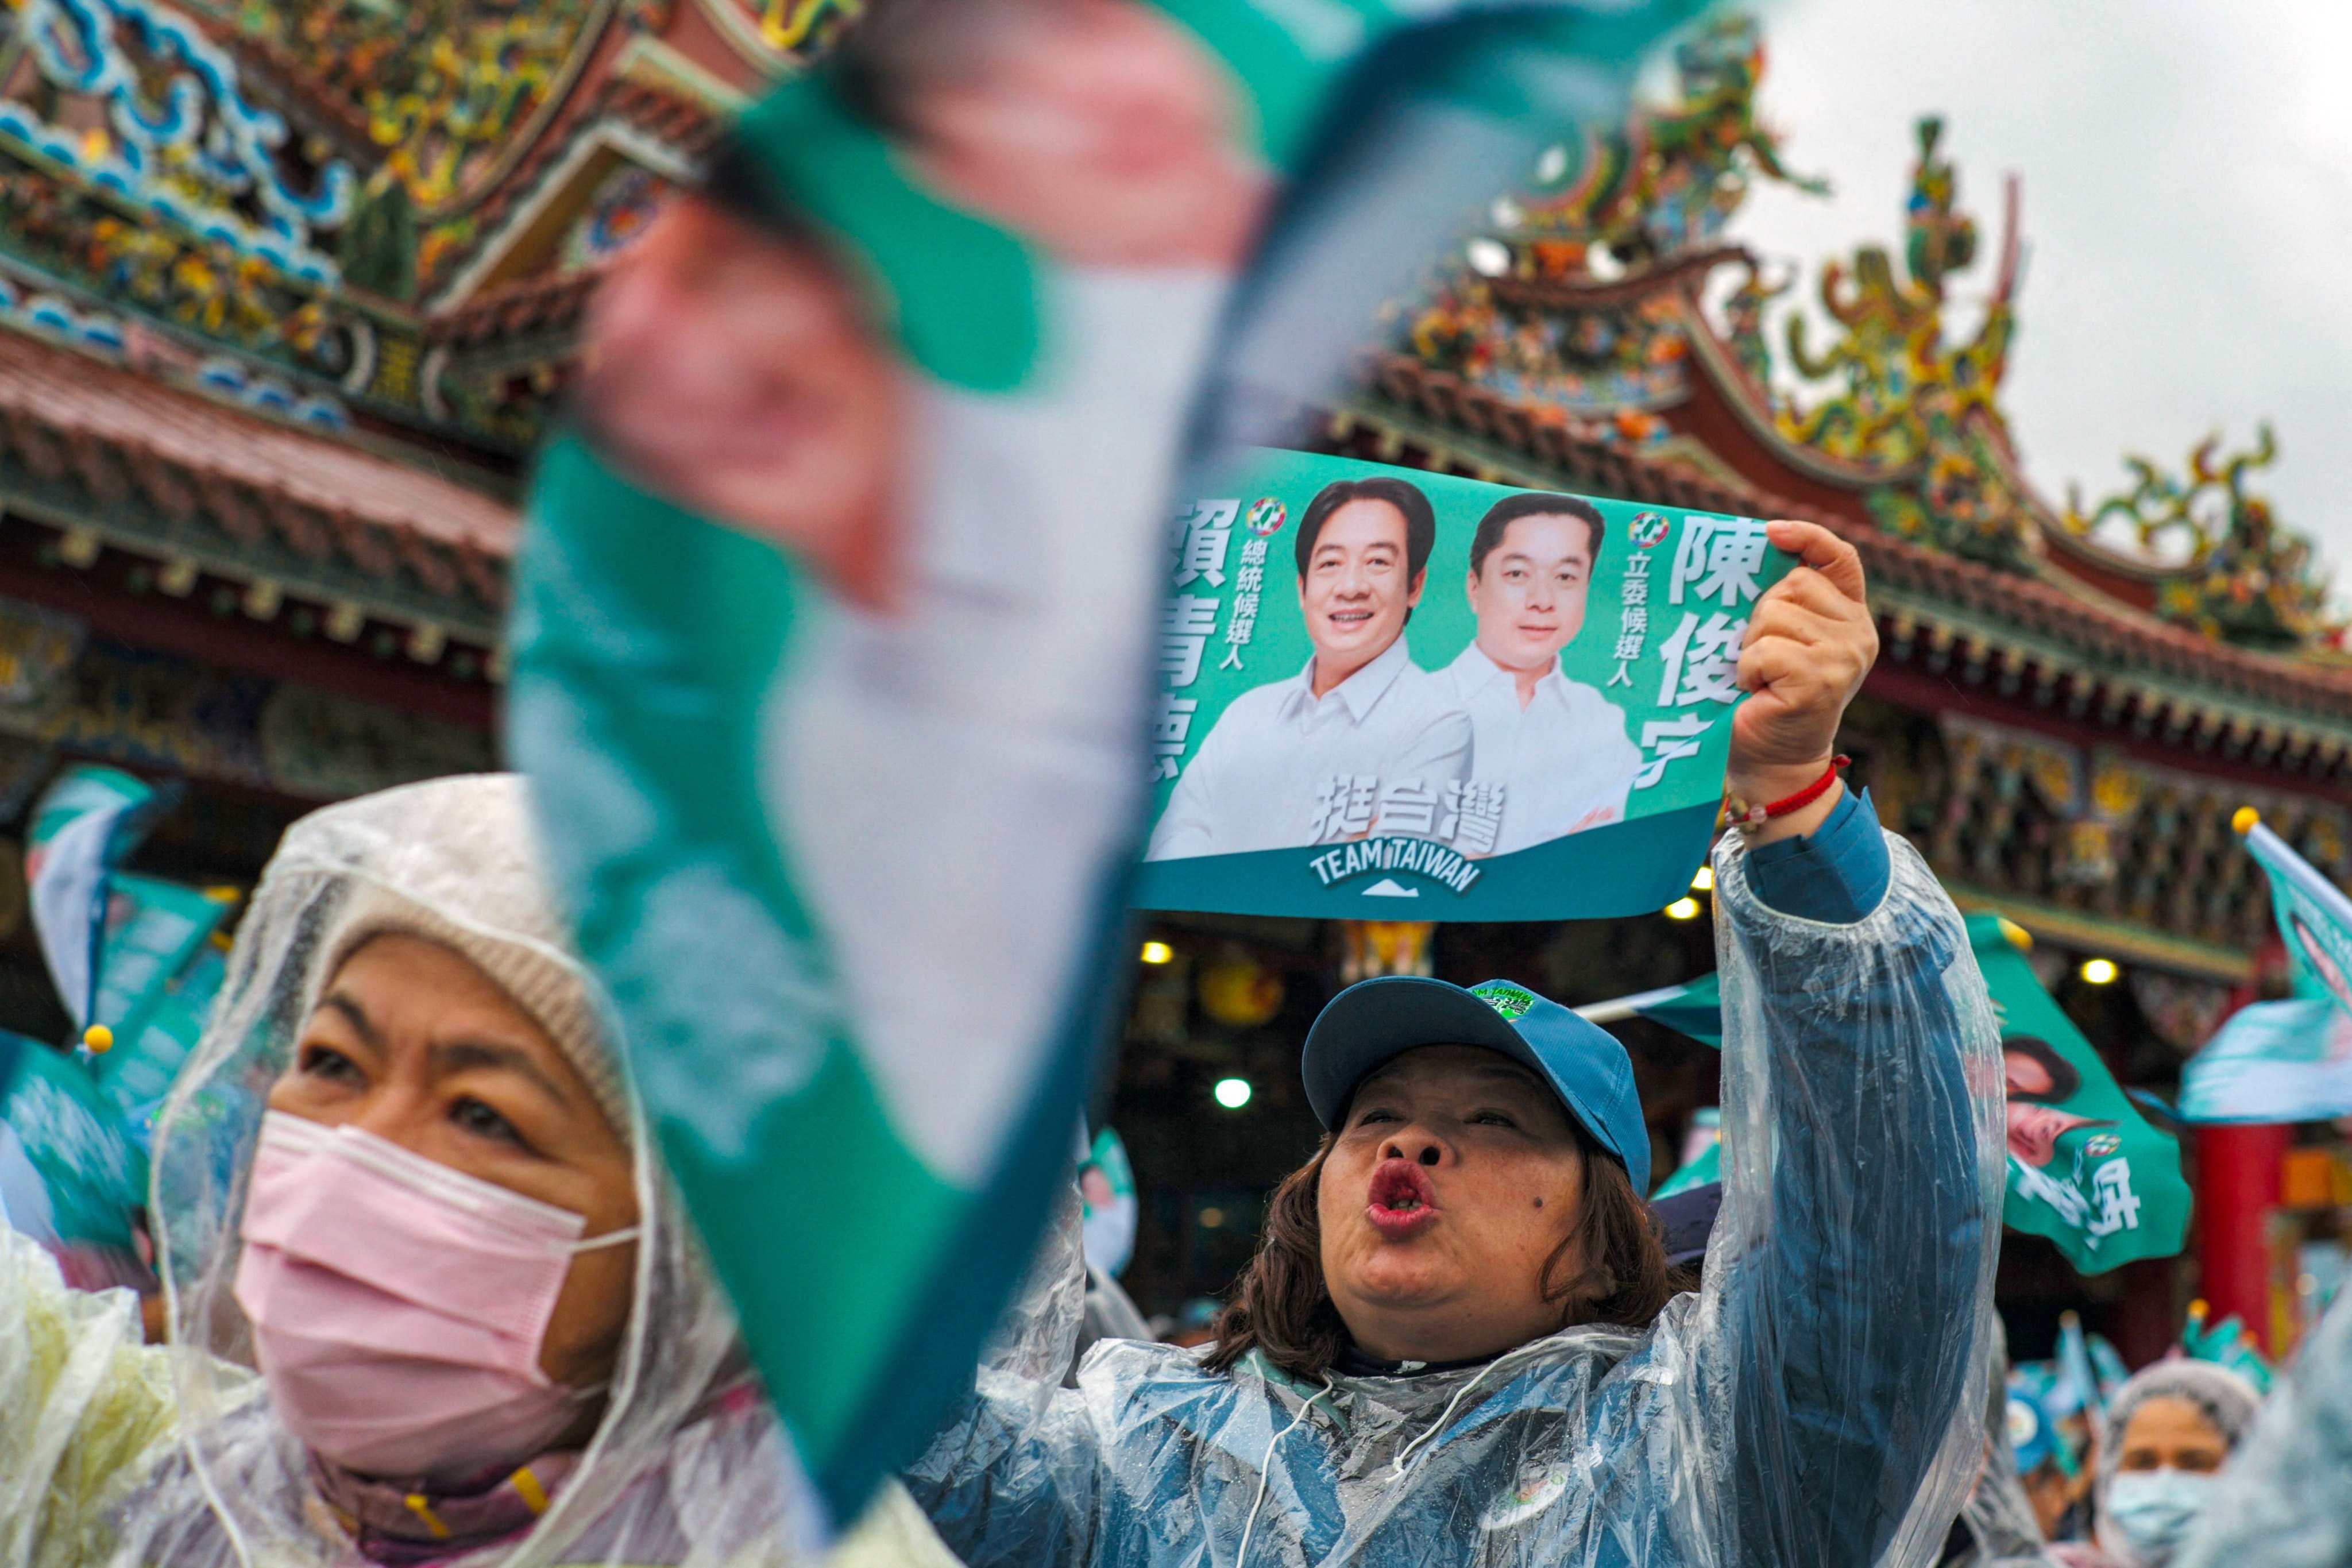 Supporters of Taiwan’s Democratic Progressive Party (DPP) at a rally in Yilan county on December 21. The DPP government has been accused of moving towards secession through salami-slicing tactics. Photo: AFP